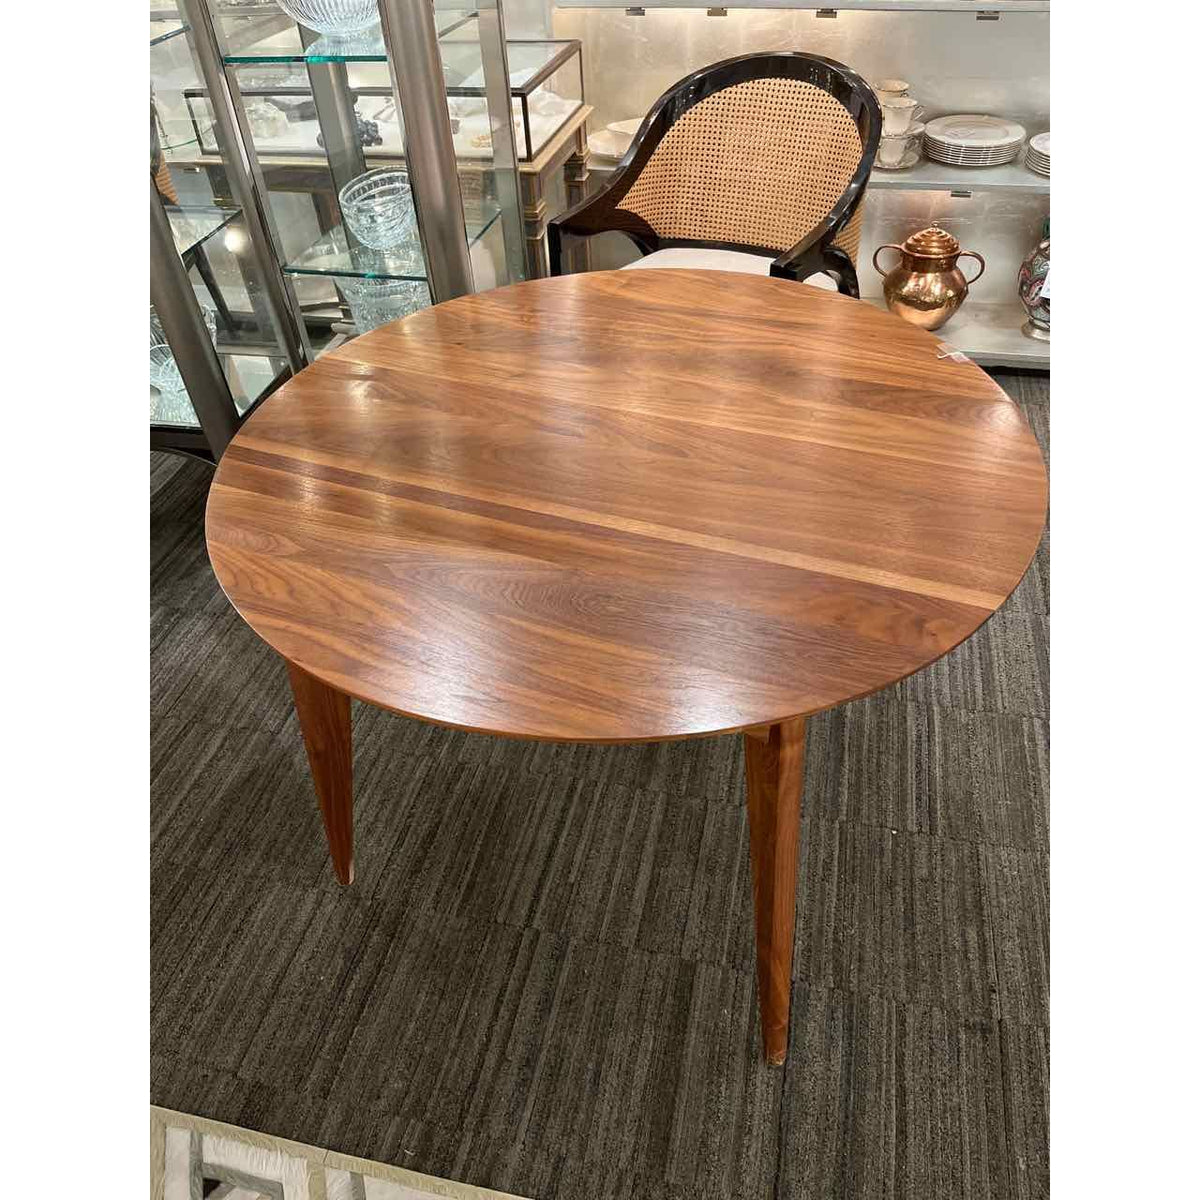 Room and Board Wood Dining Table